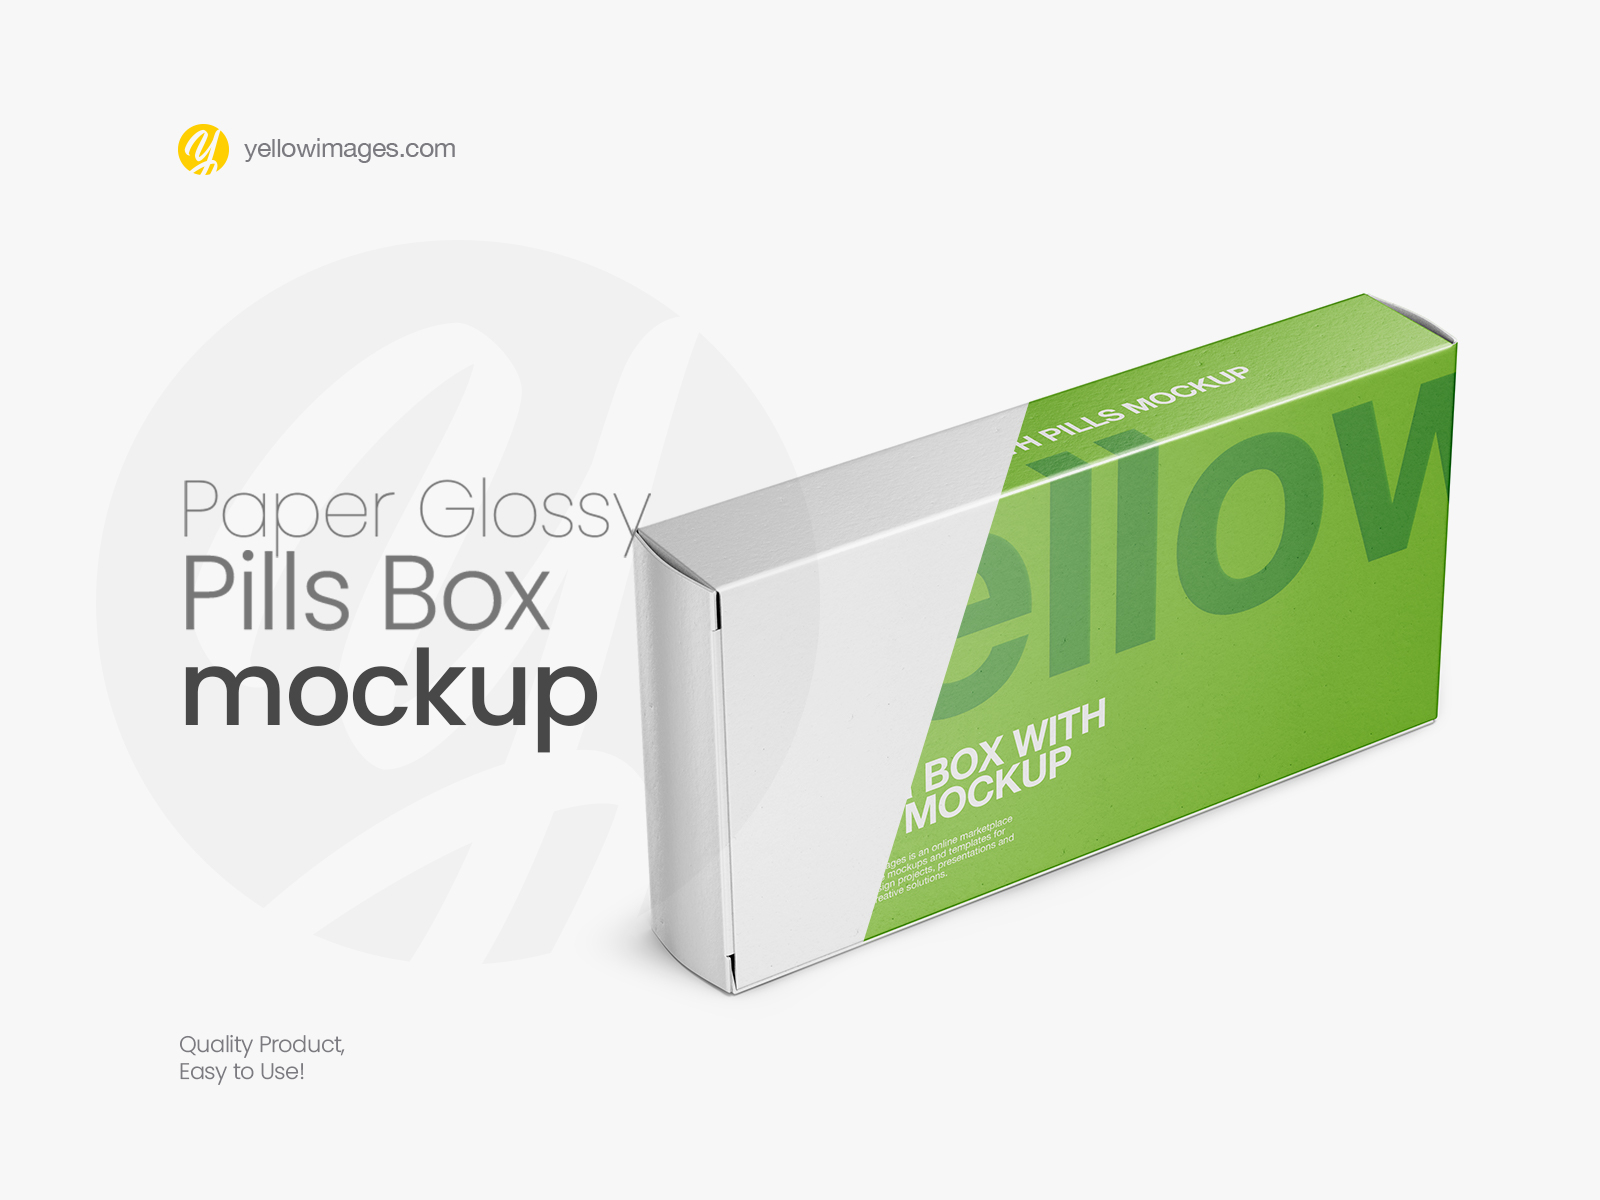 Download Free Packaging Mockup Online Free Psd Mockups Free Psd Mockups Smart Object And Templates To Create Magazines Books Stationery Clothing Mobile Packaging Business Cards PSD Mockups.